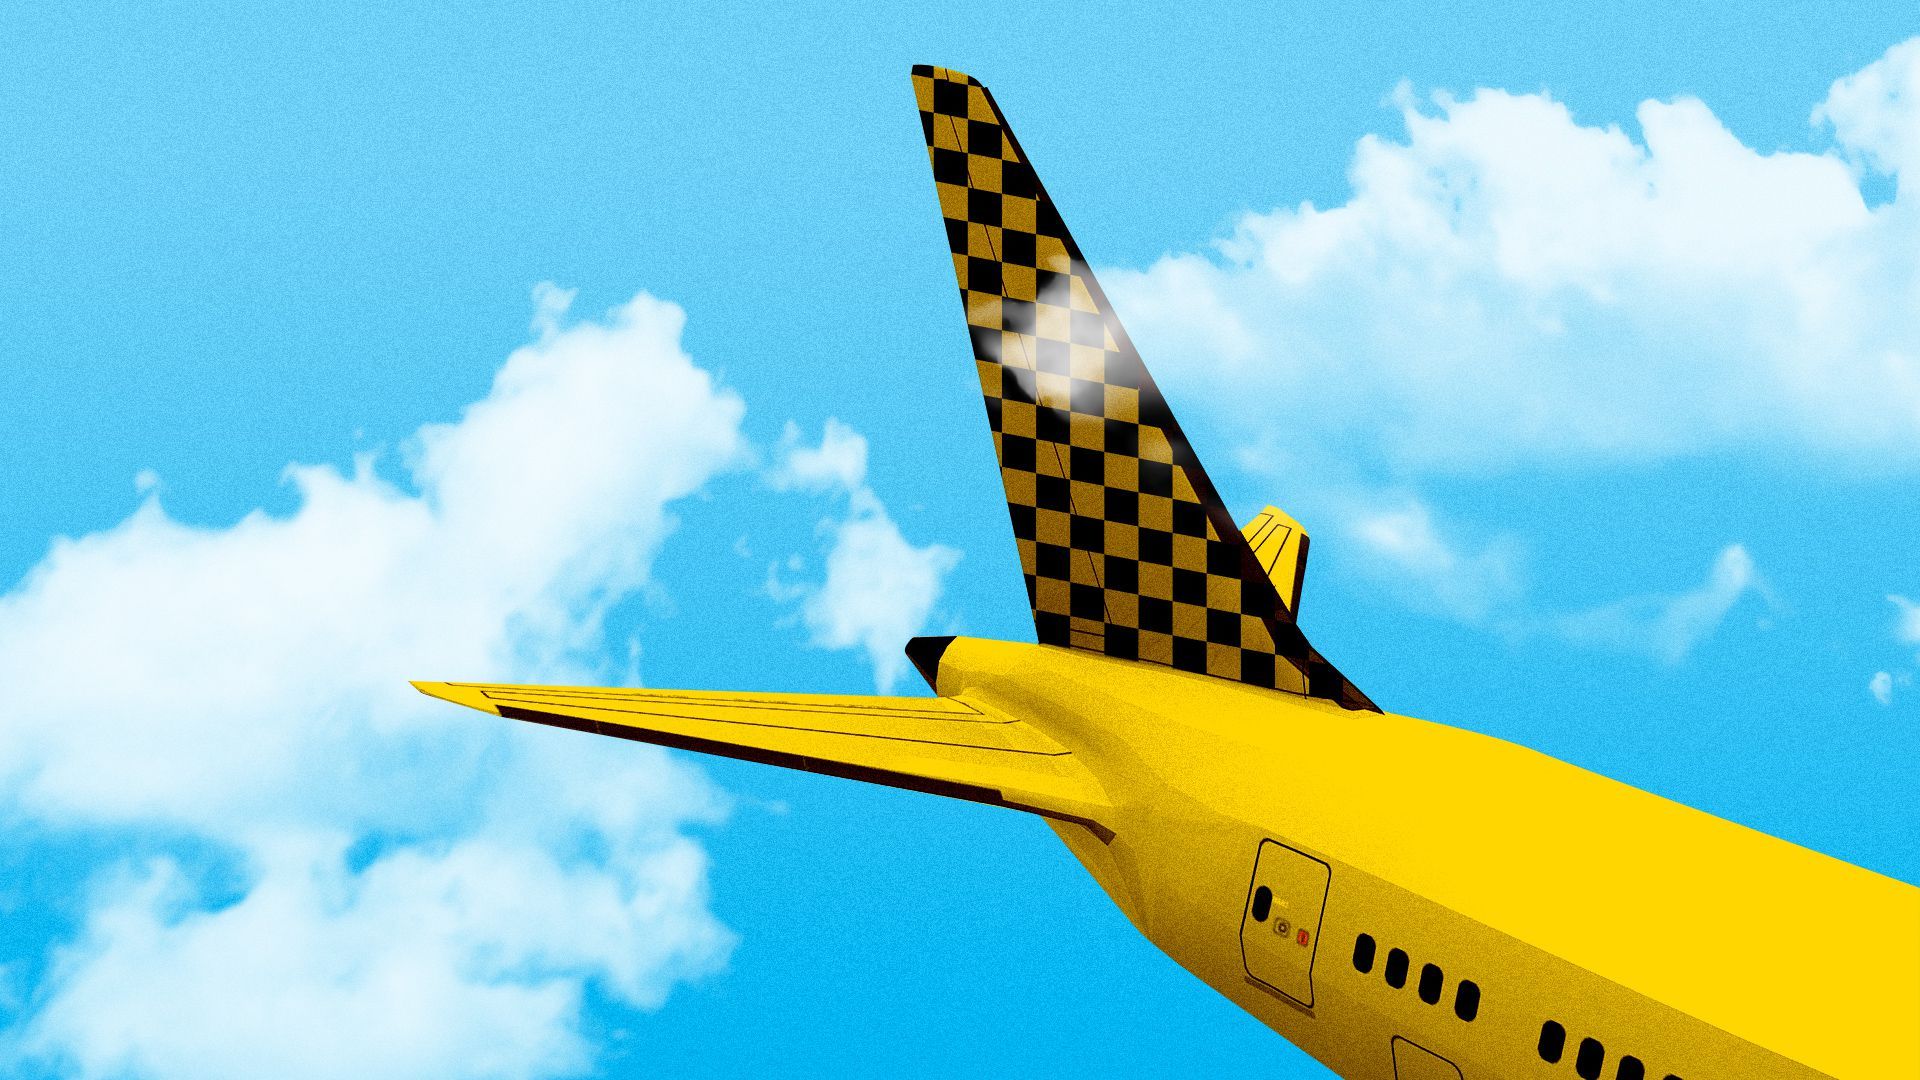 Illustration of an airplane tail with a checkered design.   